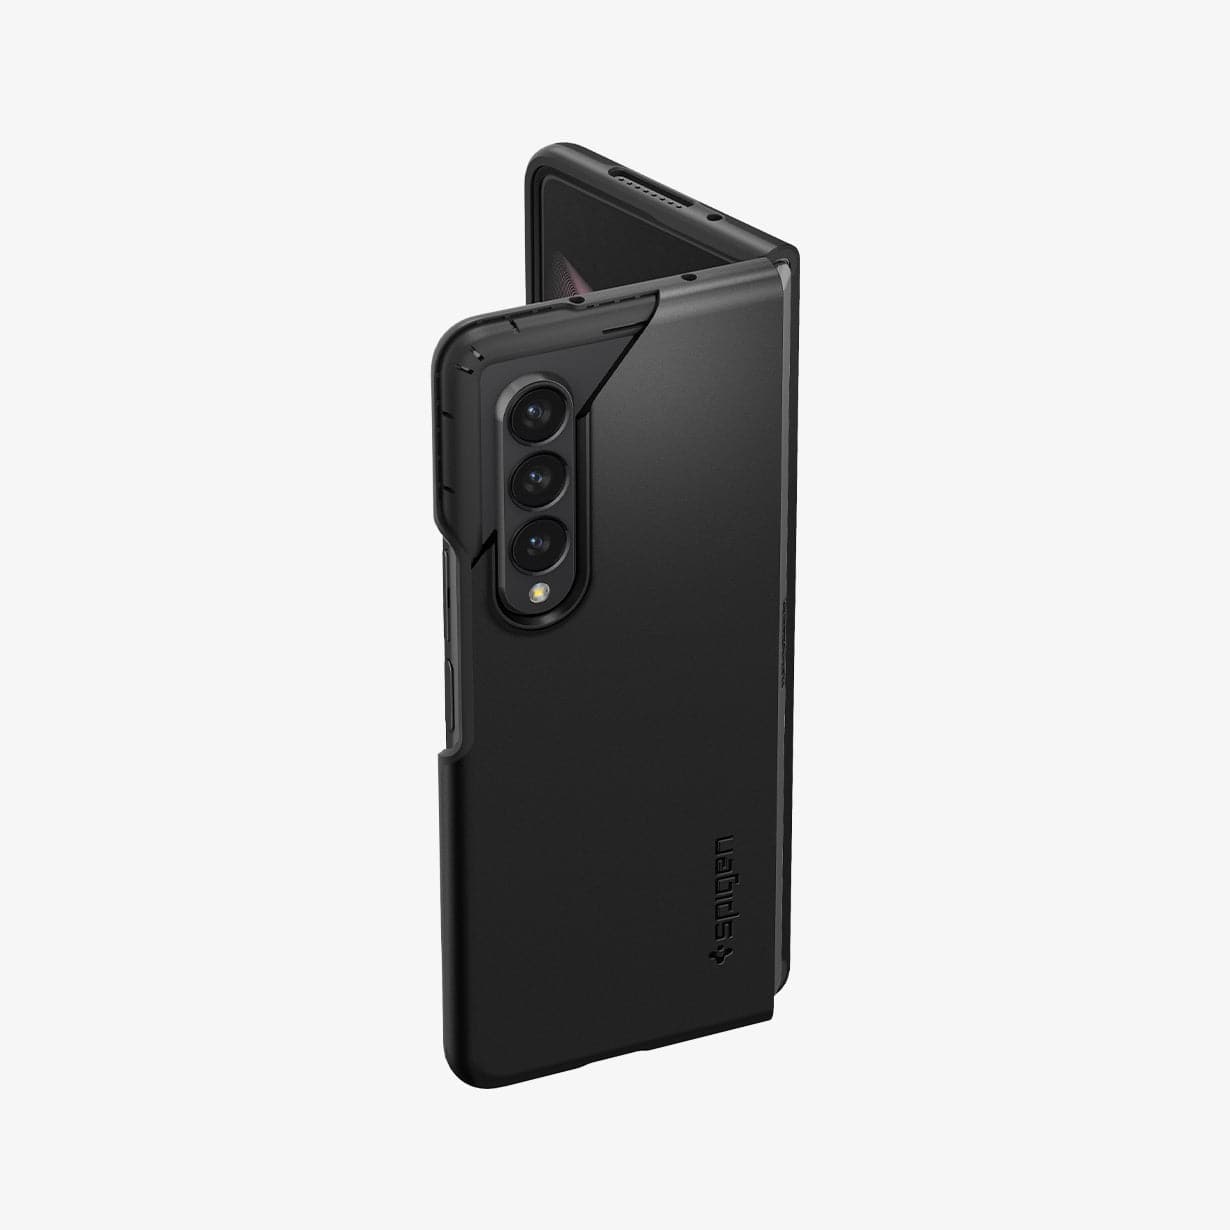 ACS03075 - Galaxy Z Fold 3 Case Thin Fit in black showing the back, top, and side edge